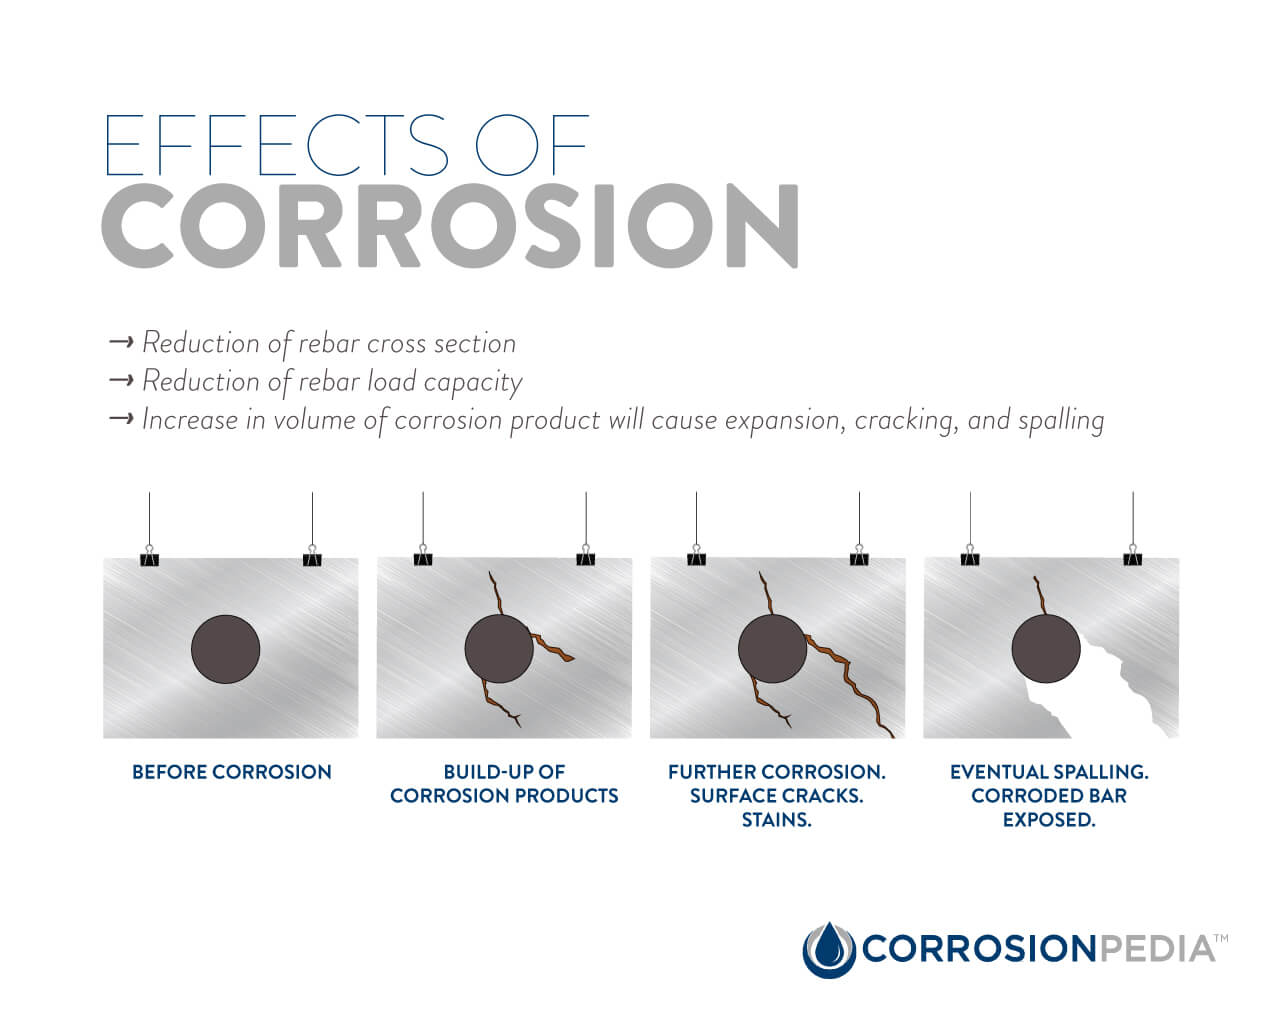 Diagram of the progressive effects of corrosion on reinforced concrete.